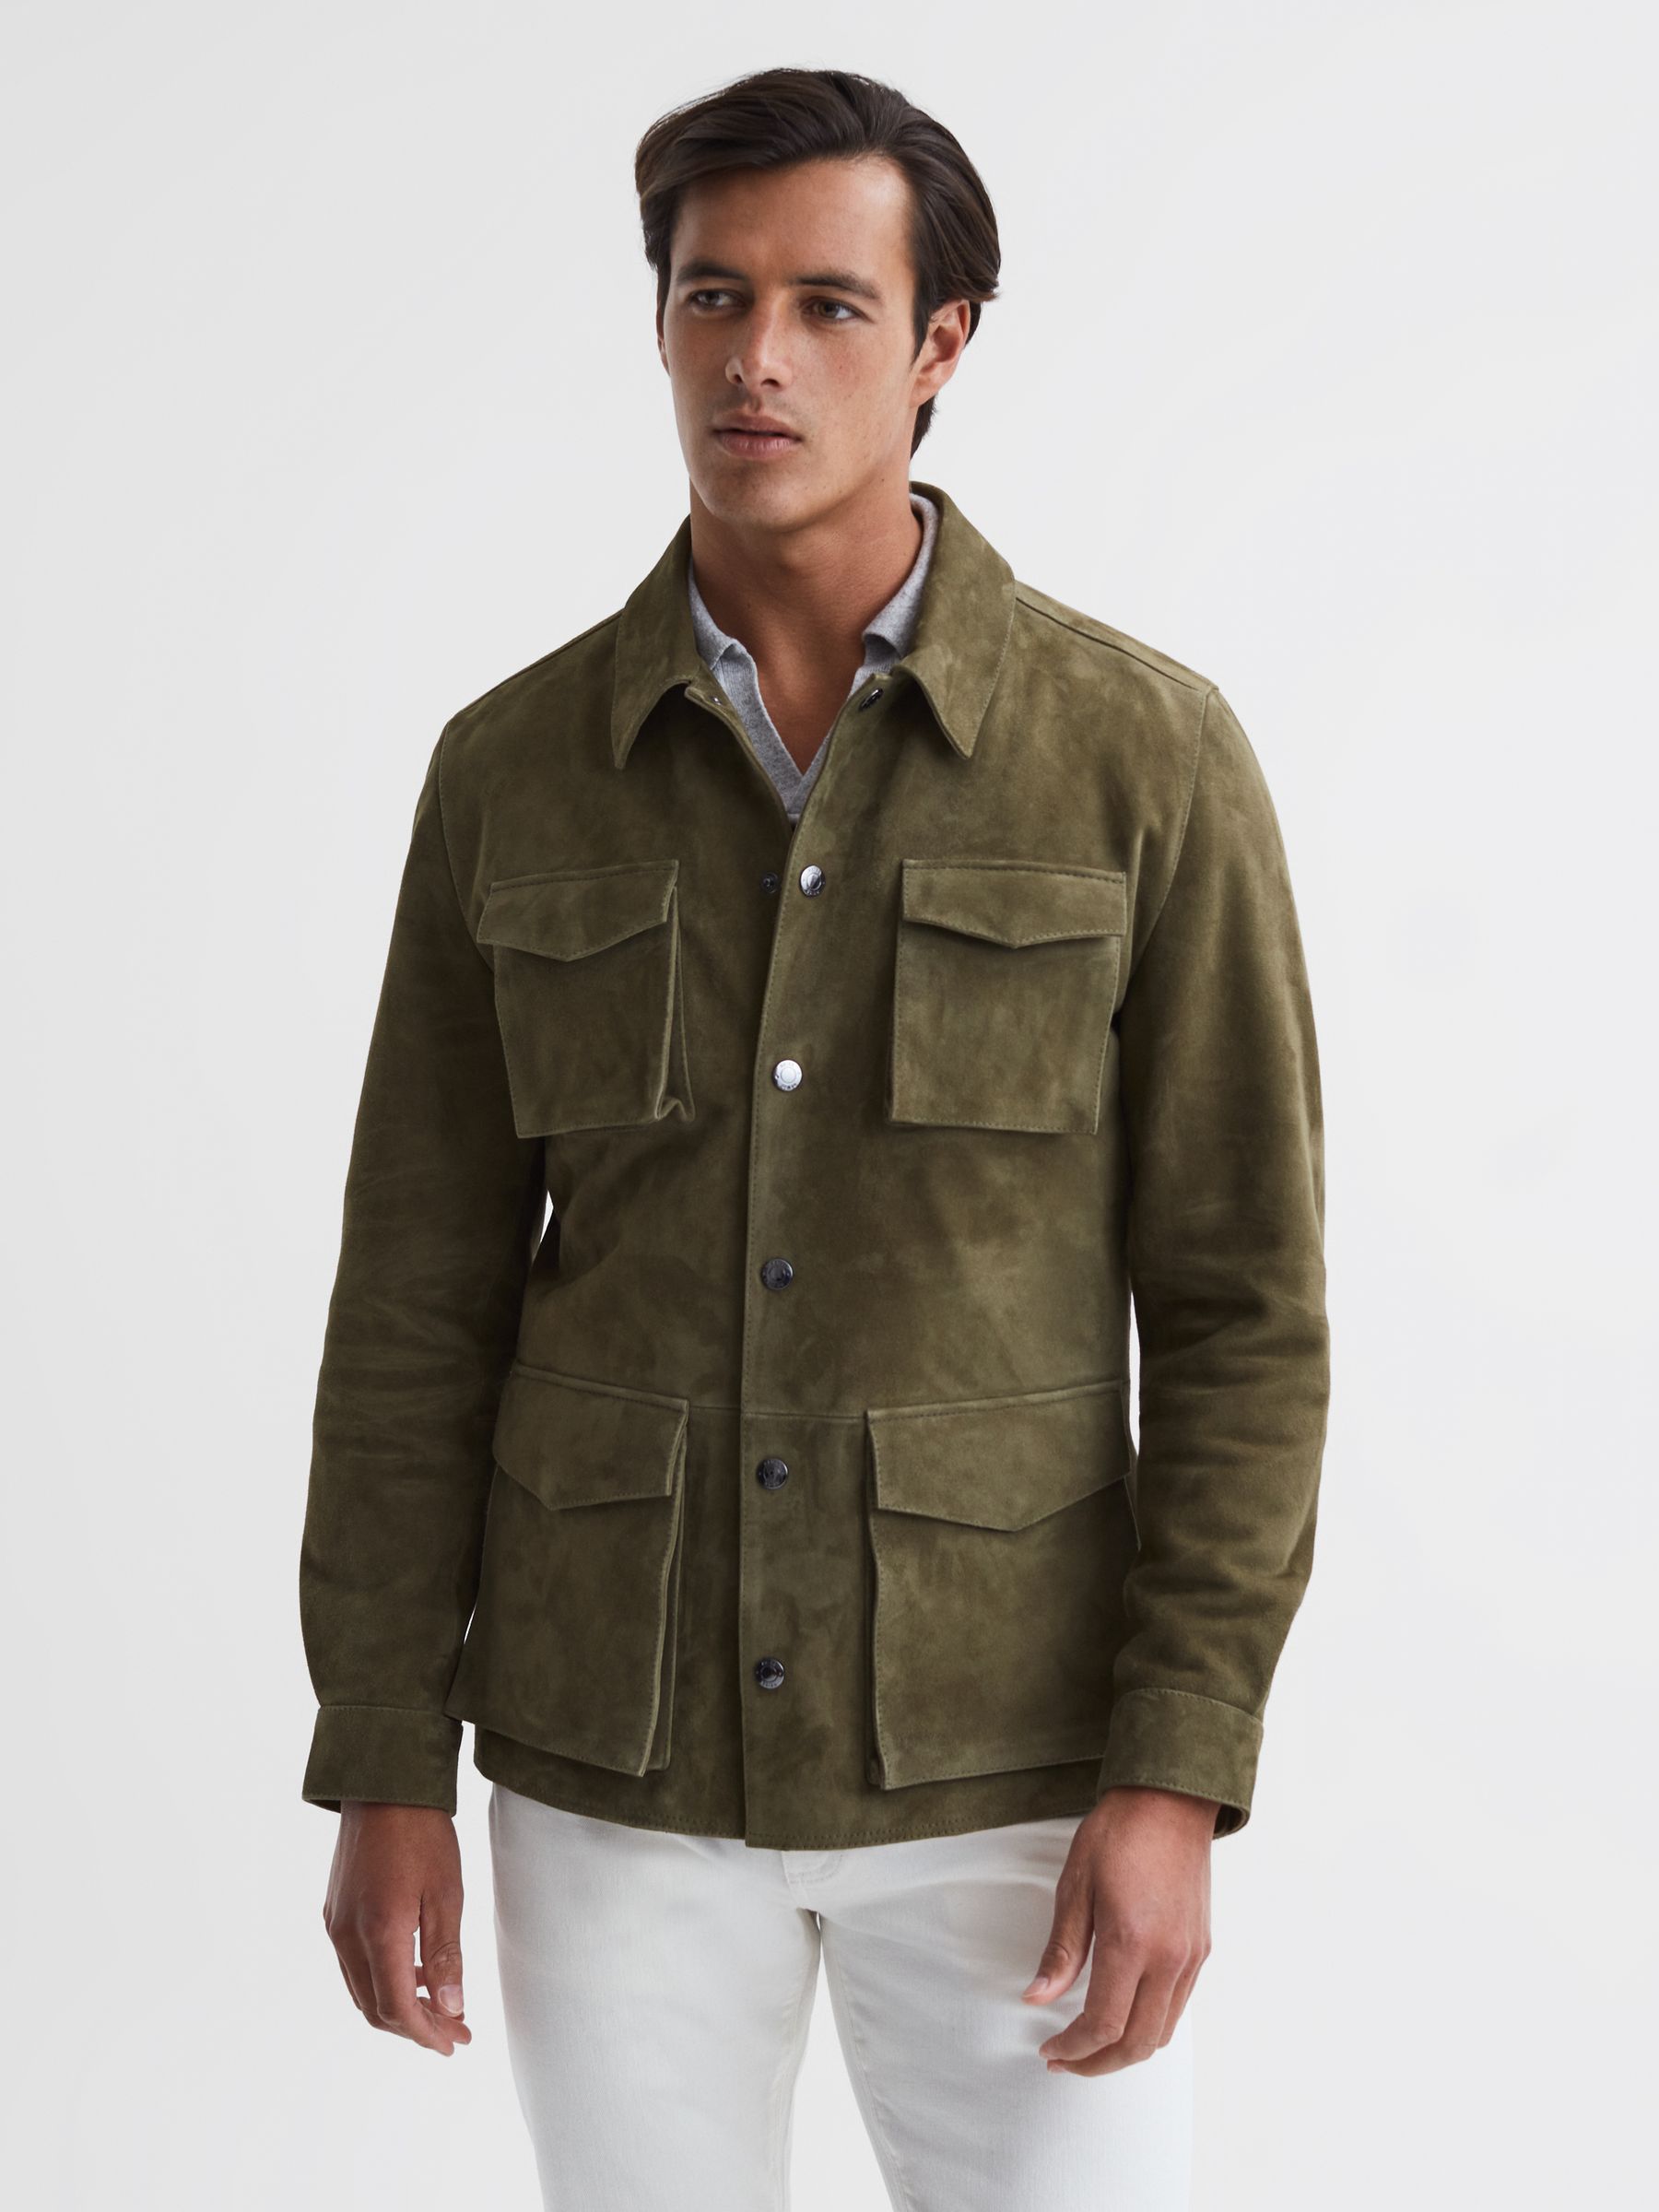 Reiss Mays Suede Long Sleeve Four Pocket Jacket - REISS